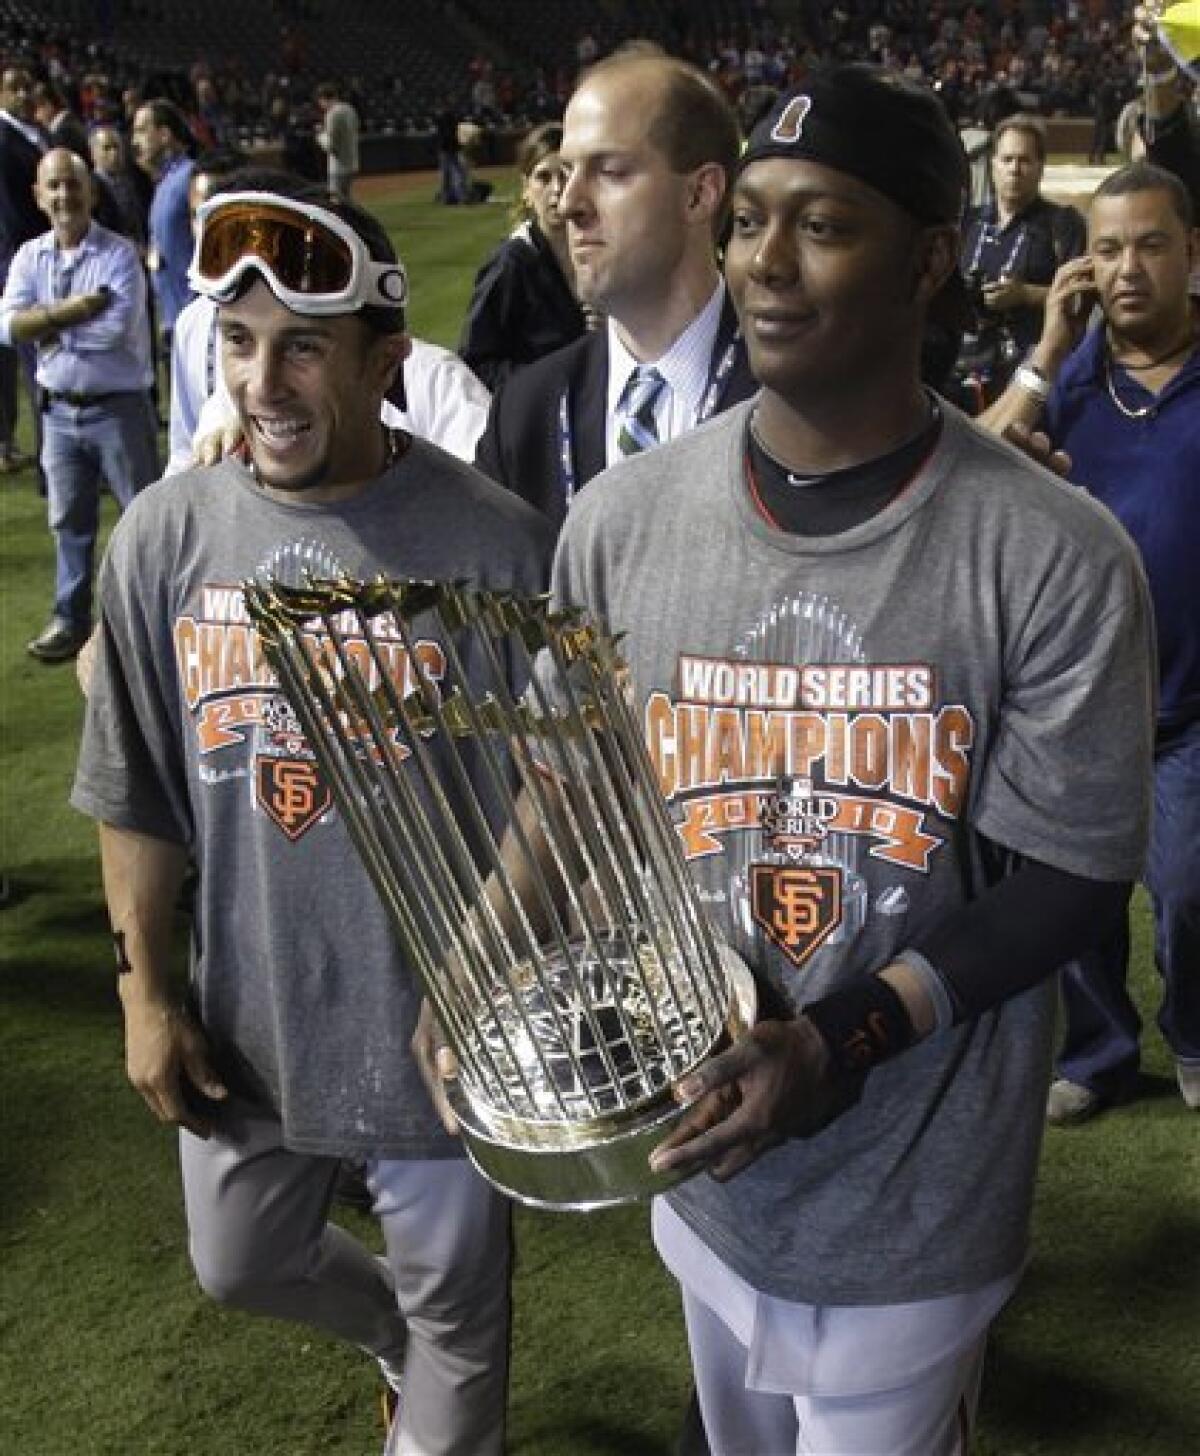 Giants' World Series trophies coming to Santa Rosa (w/video)